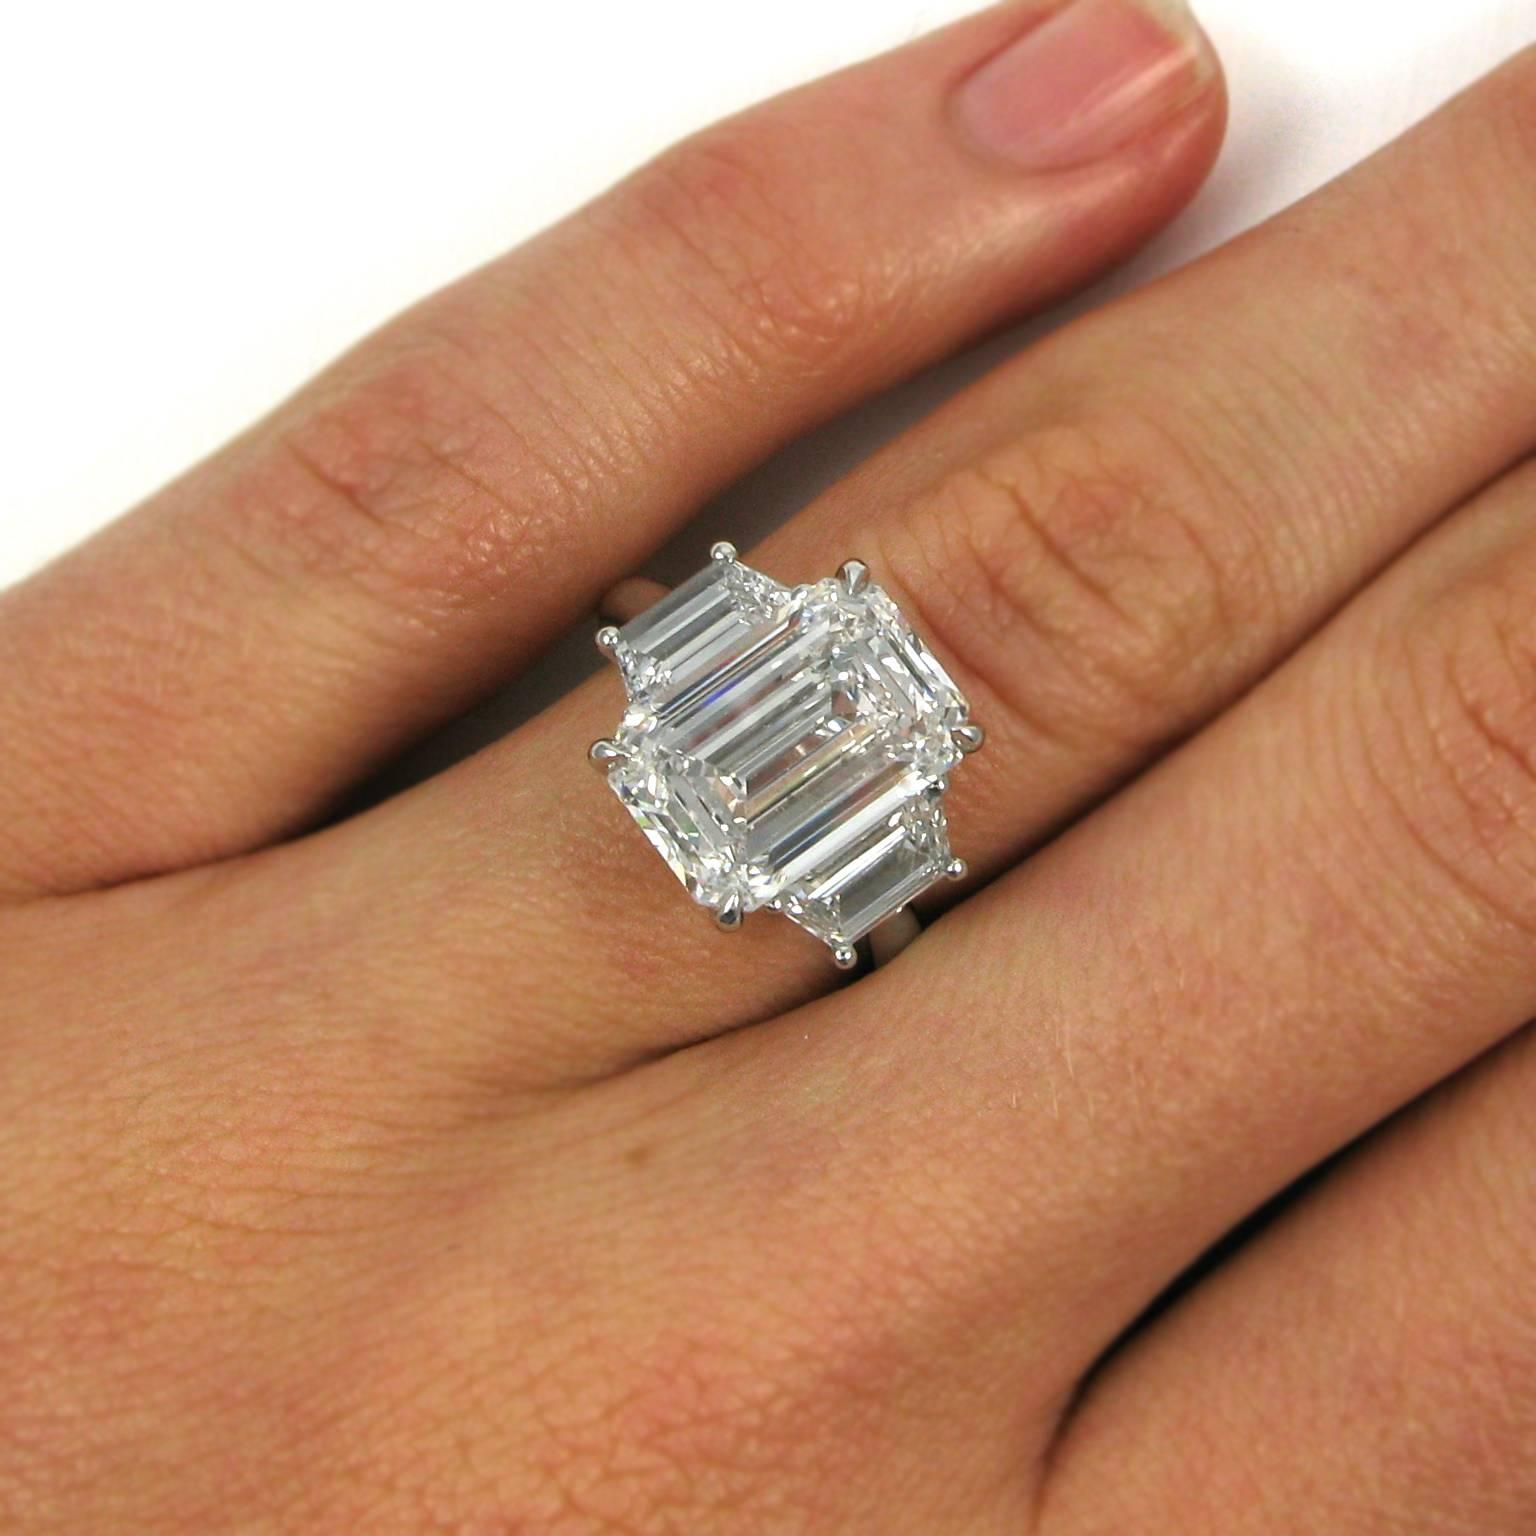 This lovely and significant ring centers on a 5.71 carat emerald-cut diamond with E color and Internally Flawless clarity. The flawless stone is flanked by two trapezoid-cut diamonds totaling 1.18 carats and mounted in platinum. 

Purchase includes